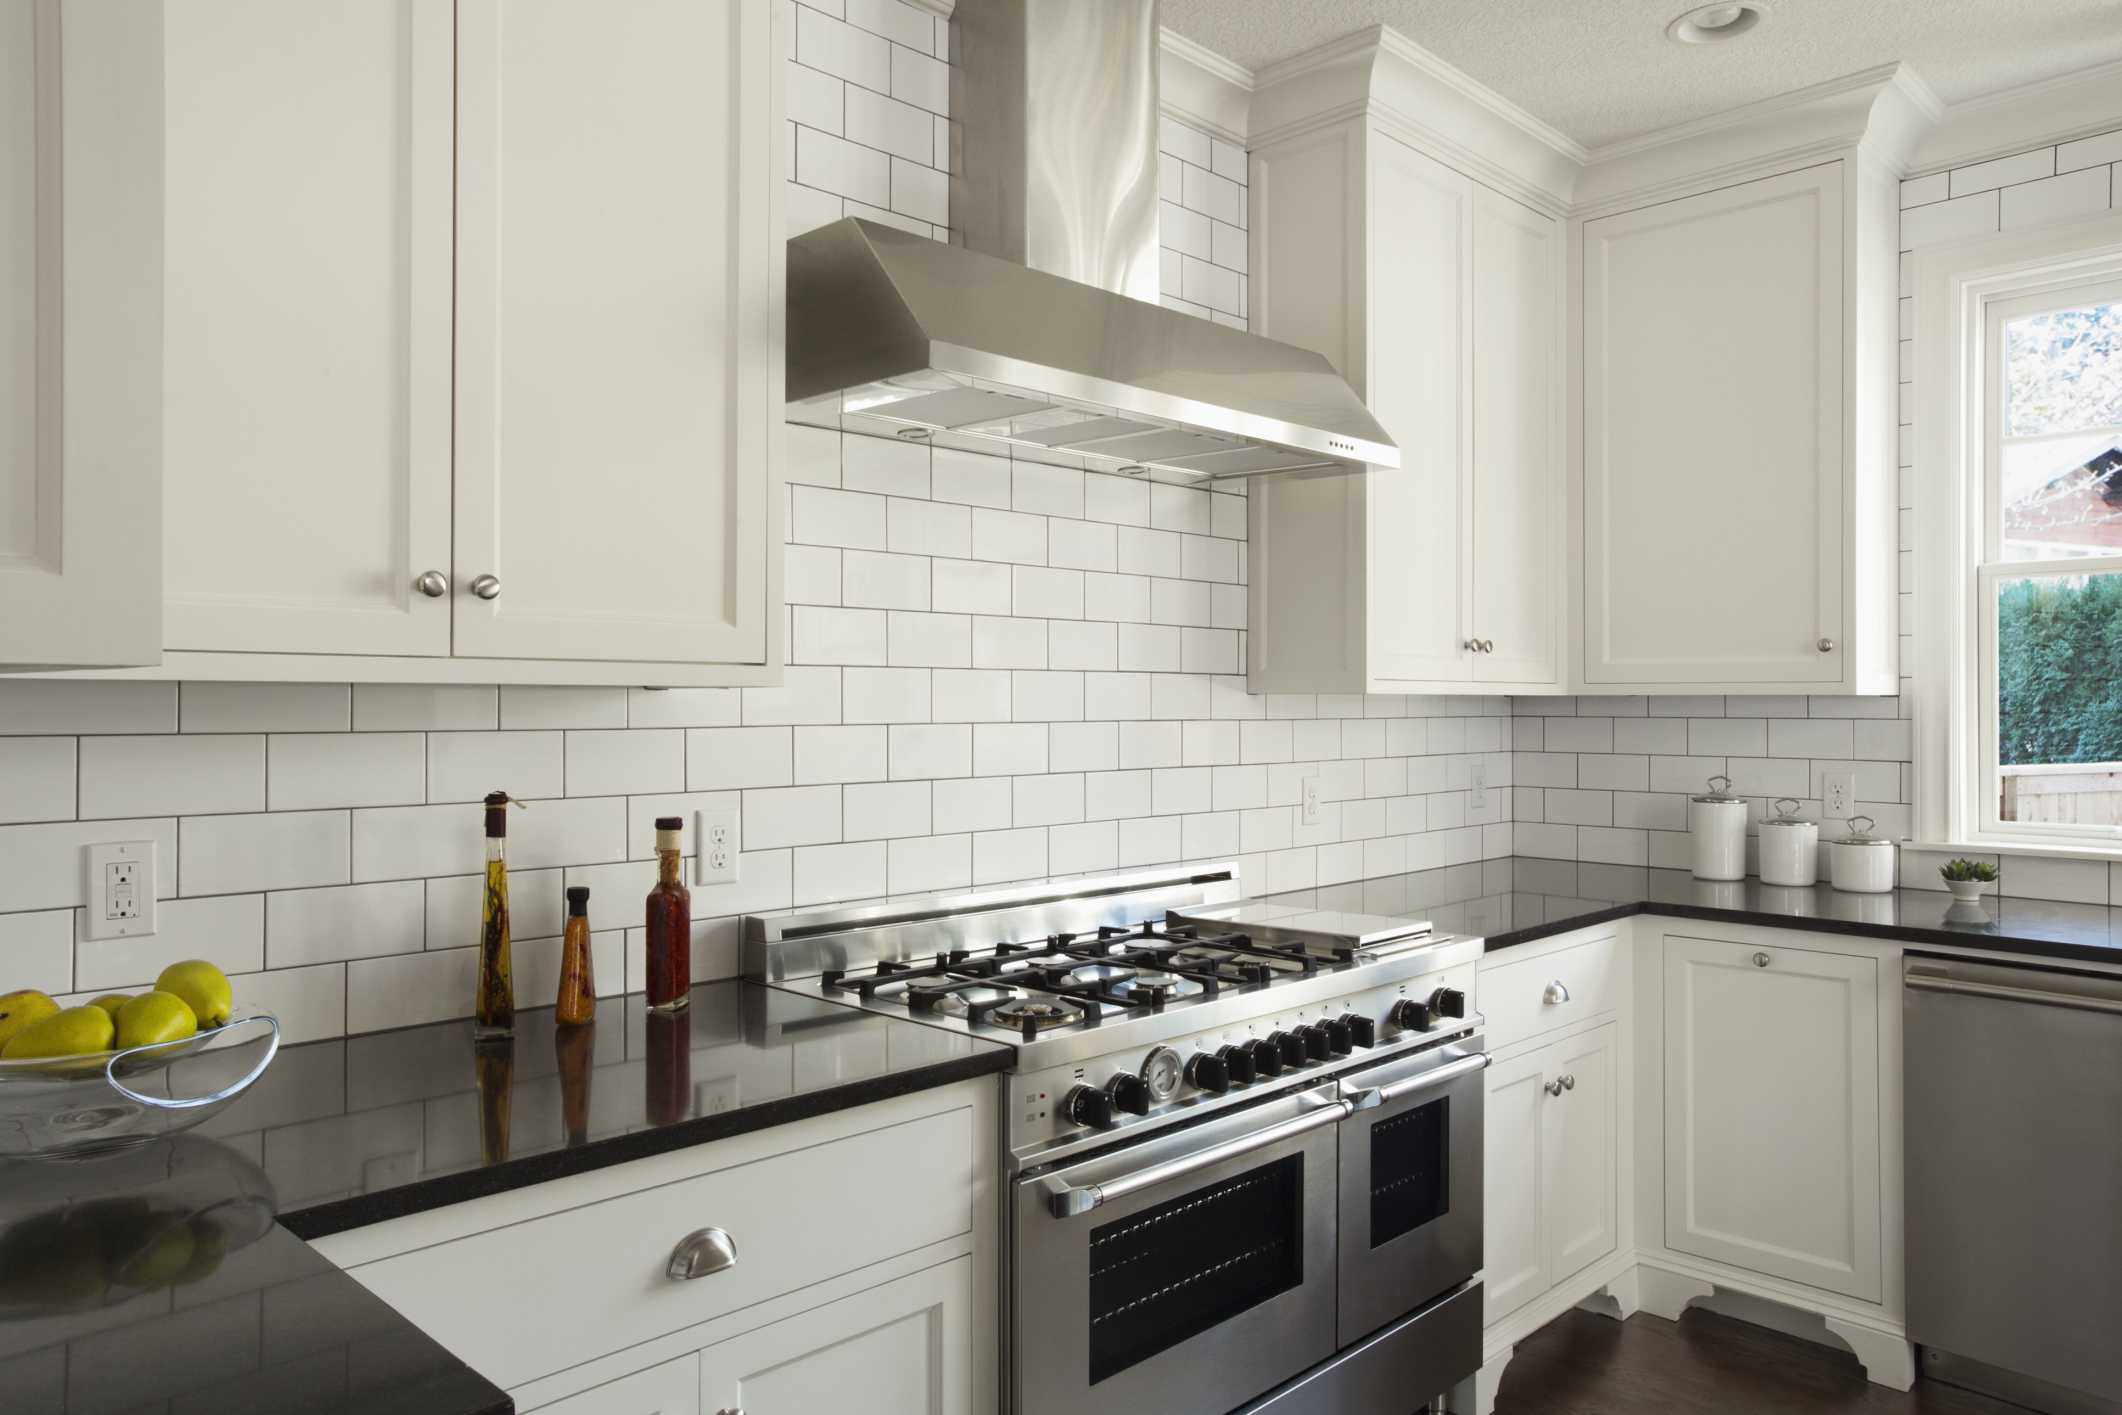 White Subway Tile Herringbone Backsplash Awesome How Subway Tile Can Effectively Work In Modern Rooms